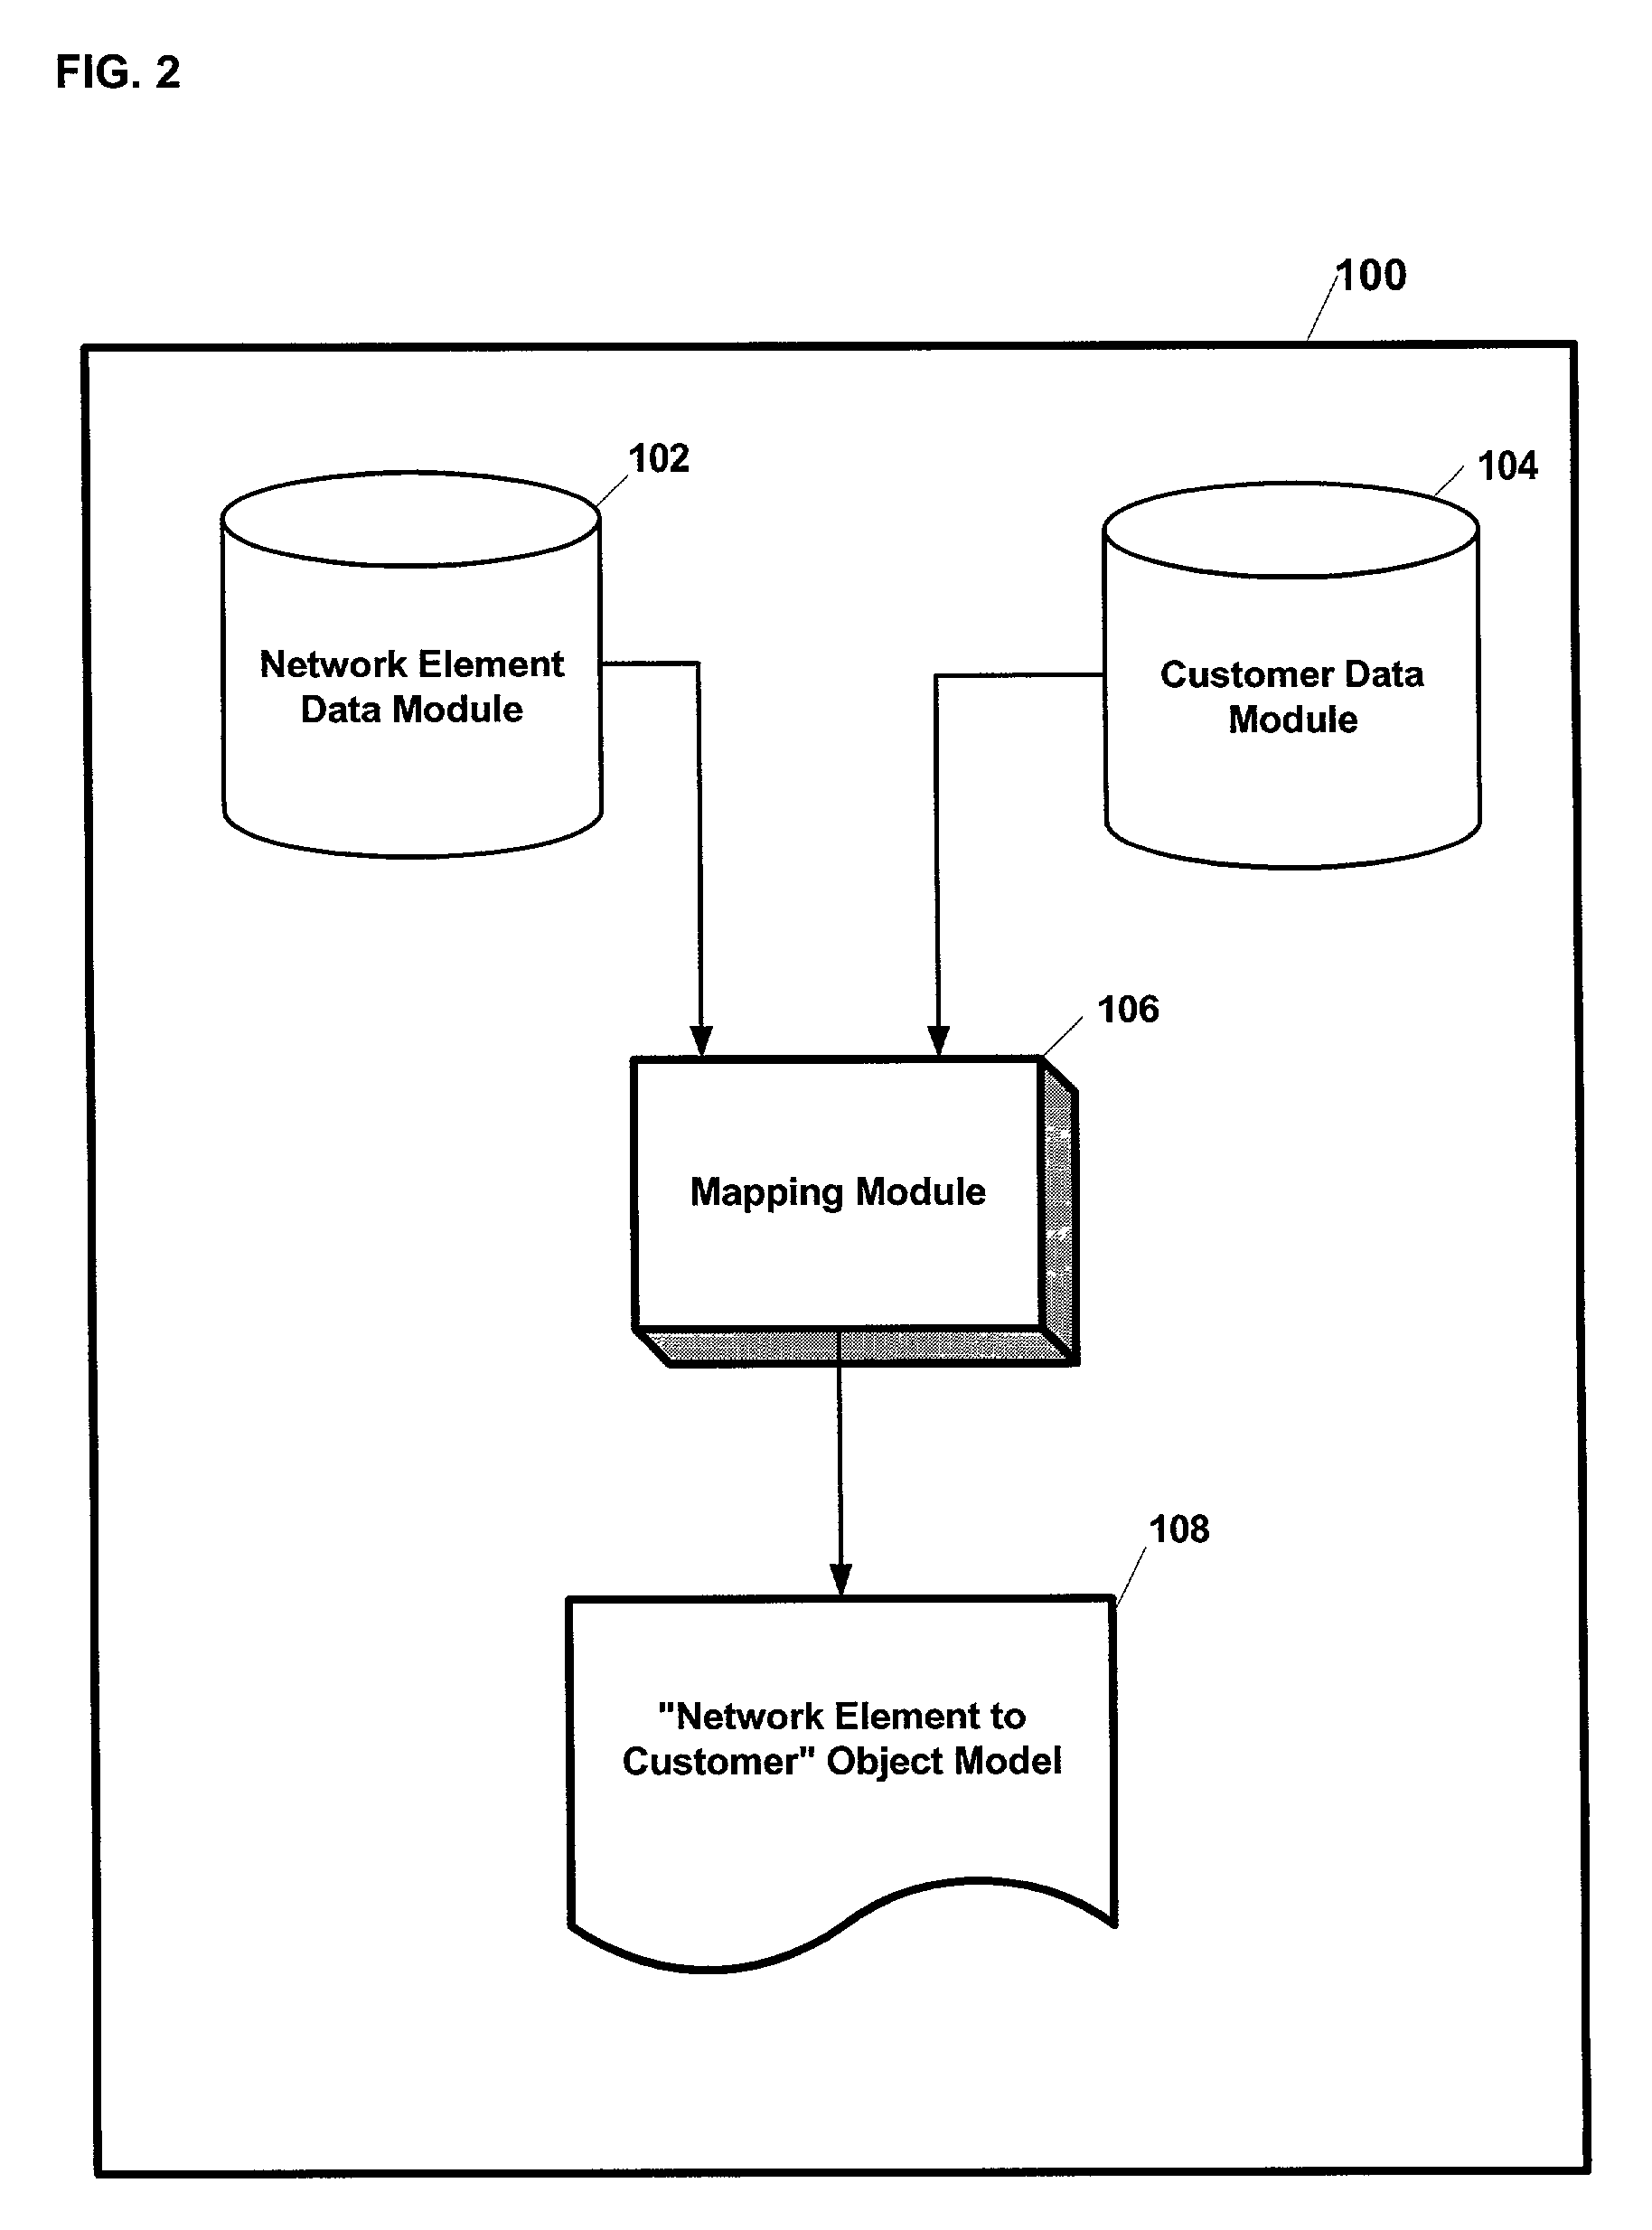 System and method for bi-directional mapping between customer identity and network elements